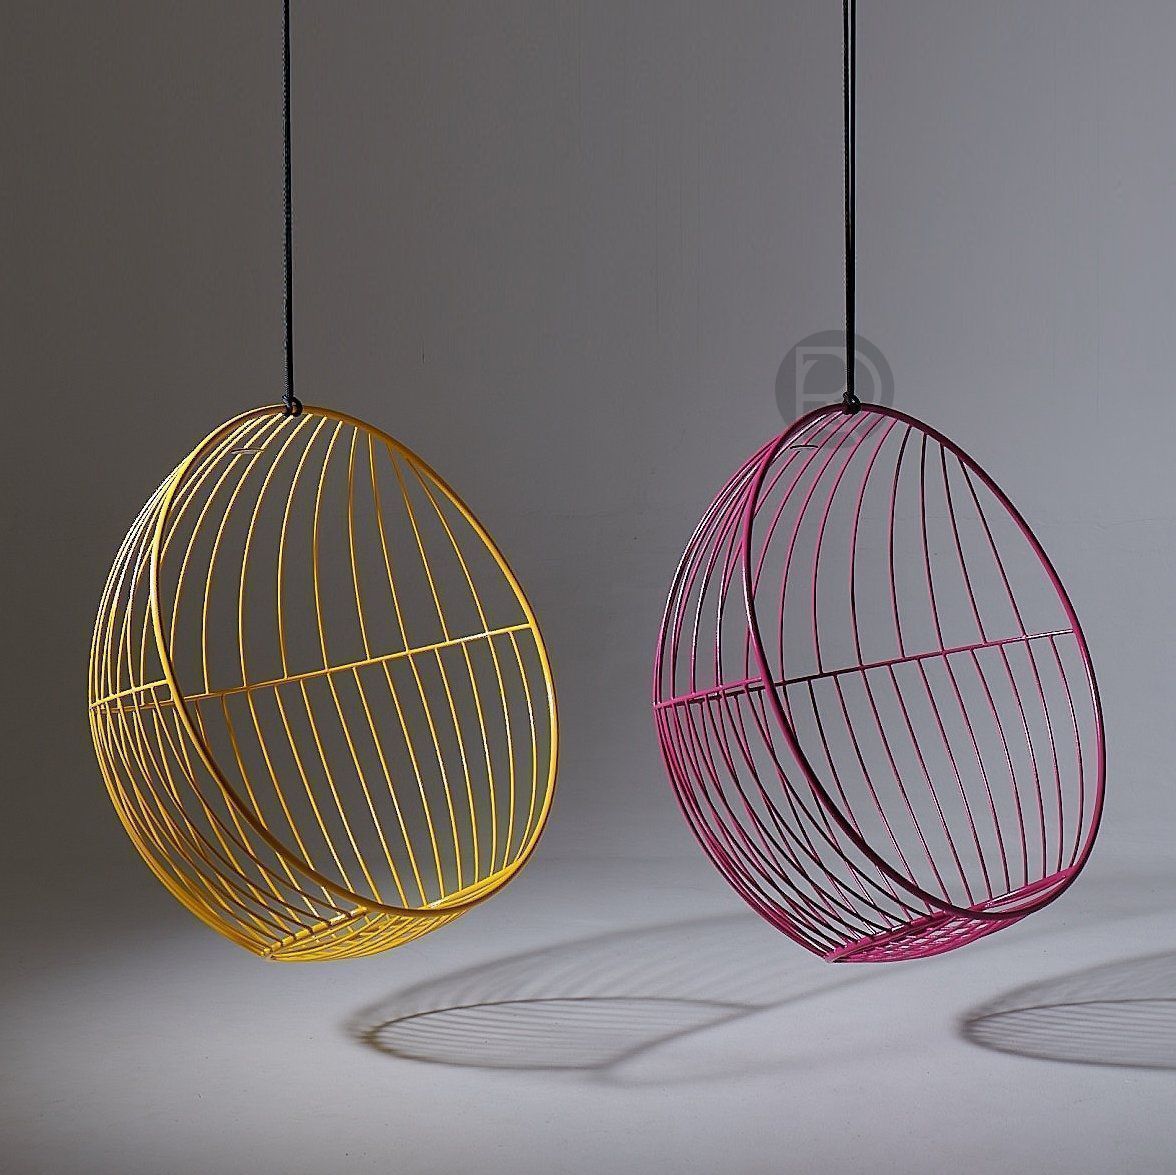 BUBBLE chair by Studio Stirling